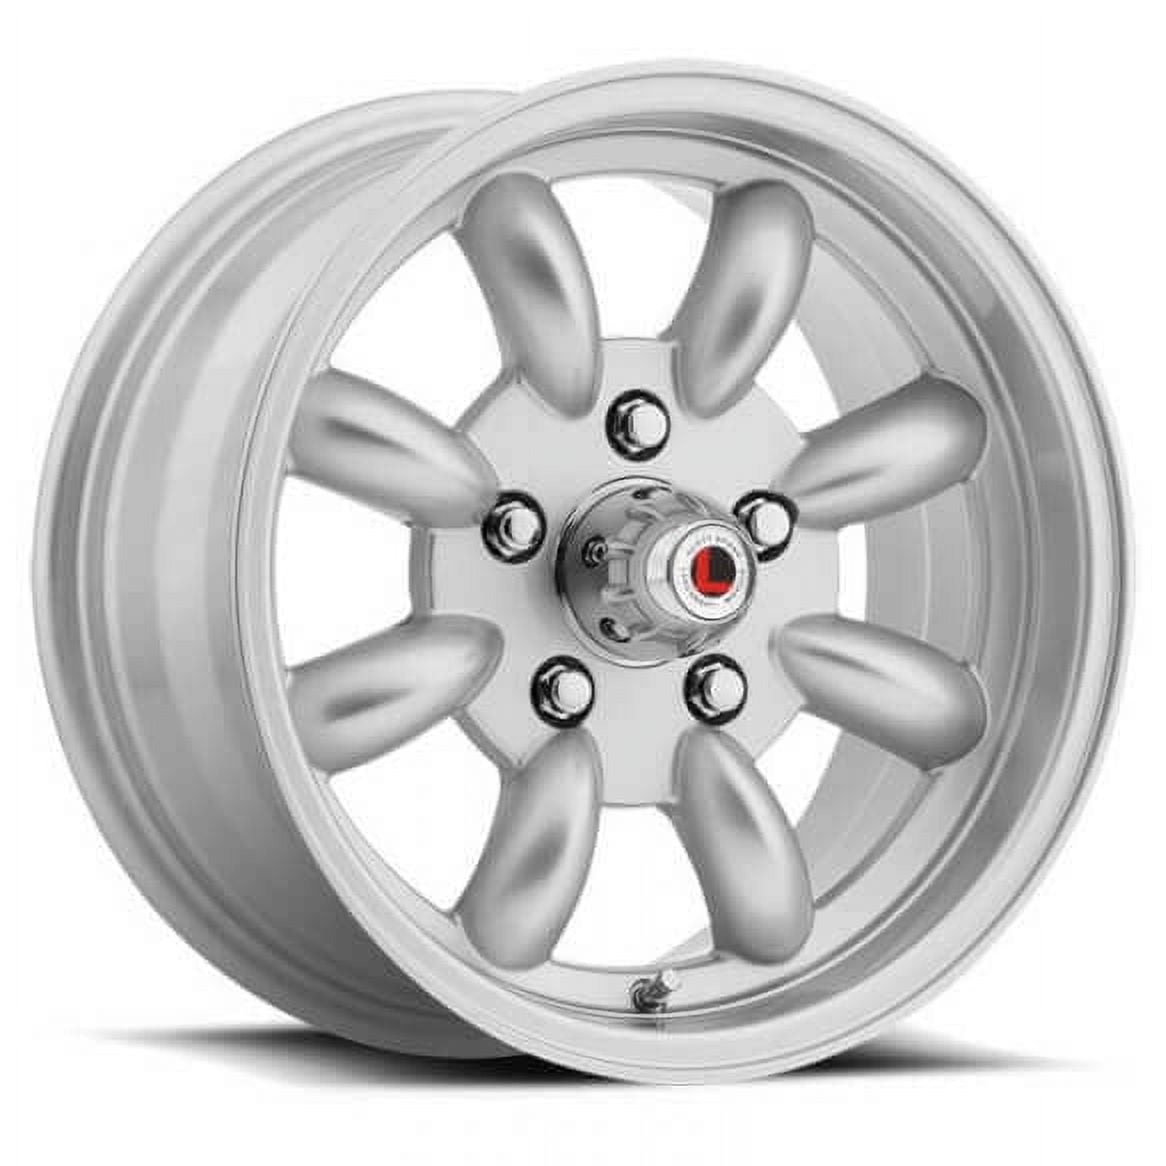 Legendary Wheels T/A 8-Spoke 15 x in. x 4.5 4.25 BS Silver Fits  select: 1966-1973 FORD MUSTANG, 1968-1969 PLYMOUTH SATTELITE